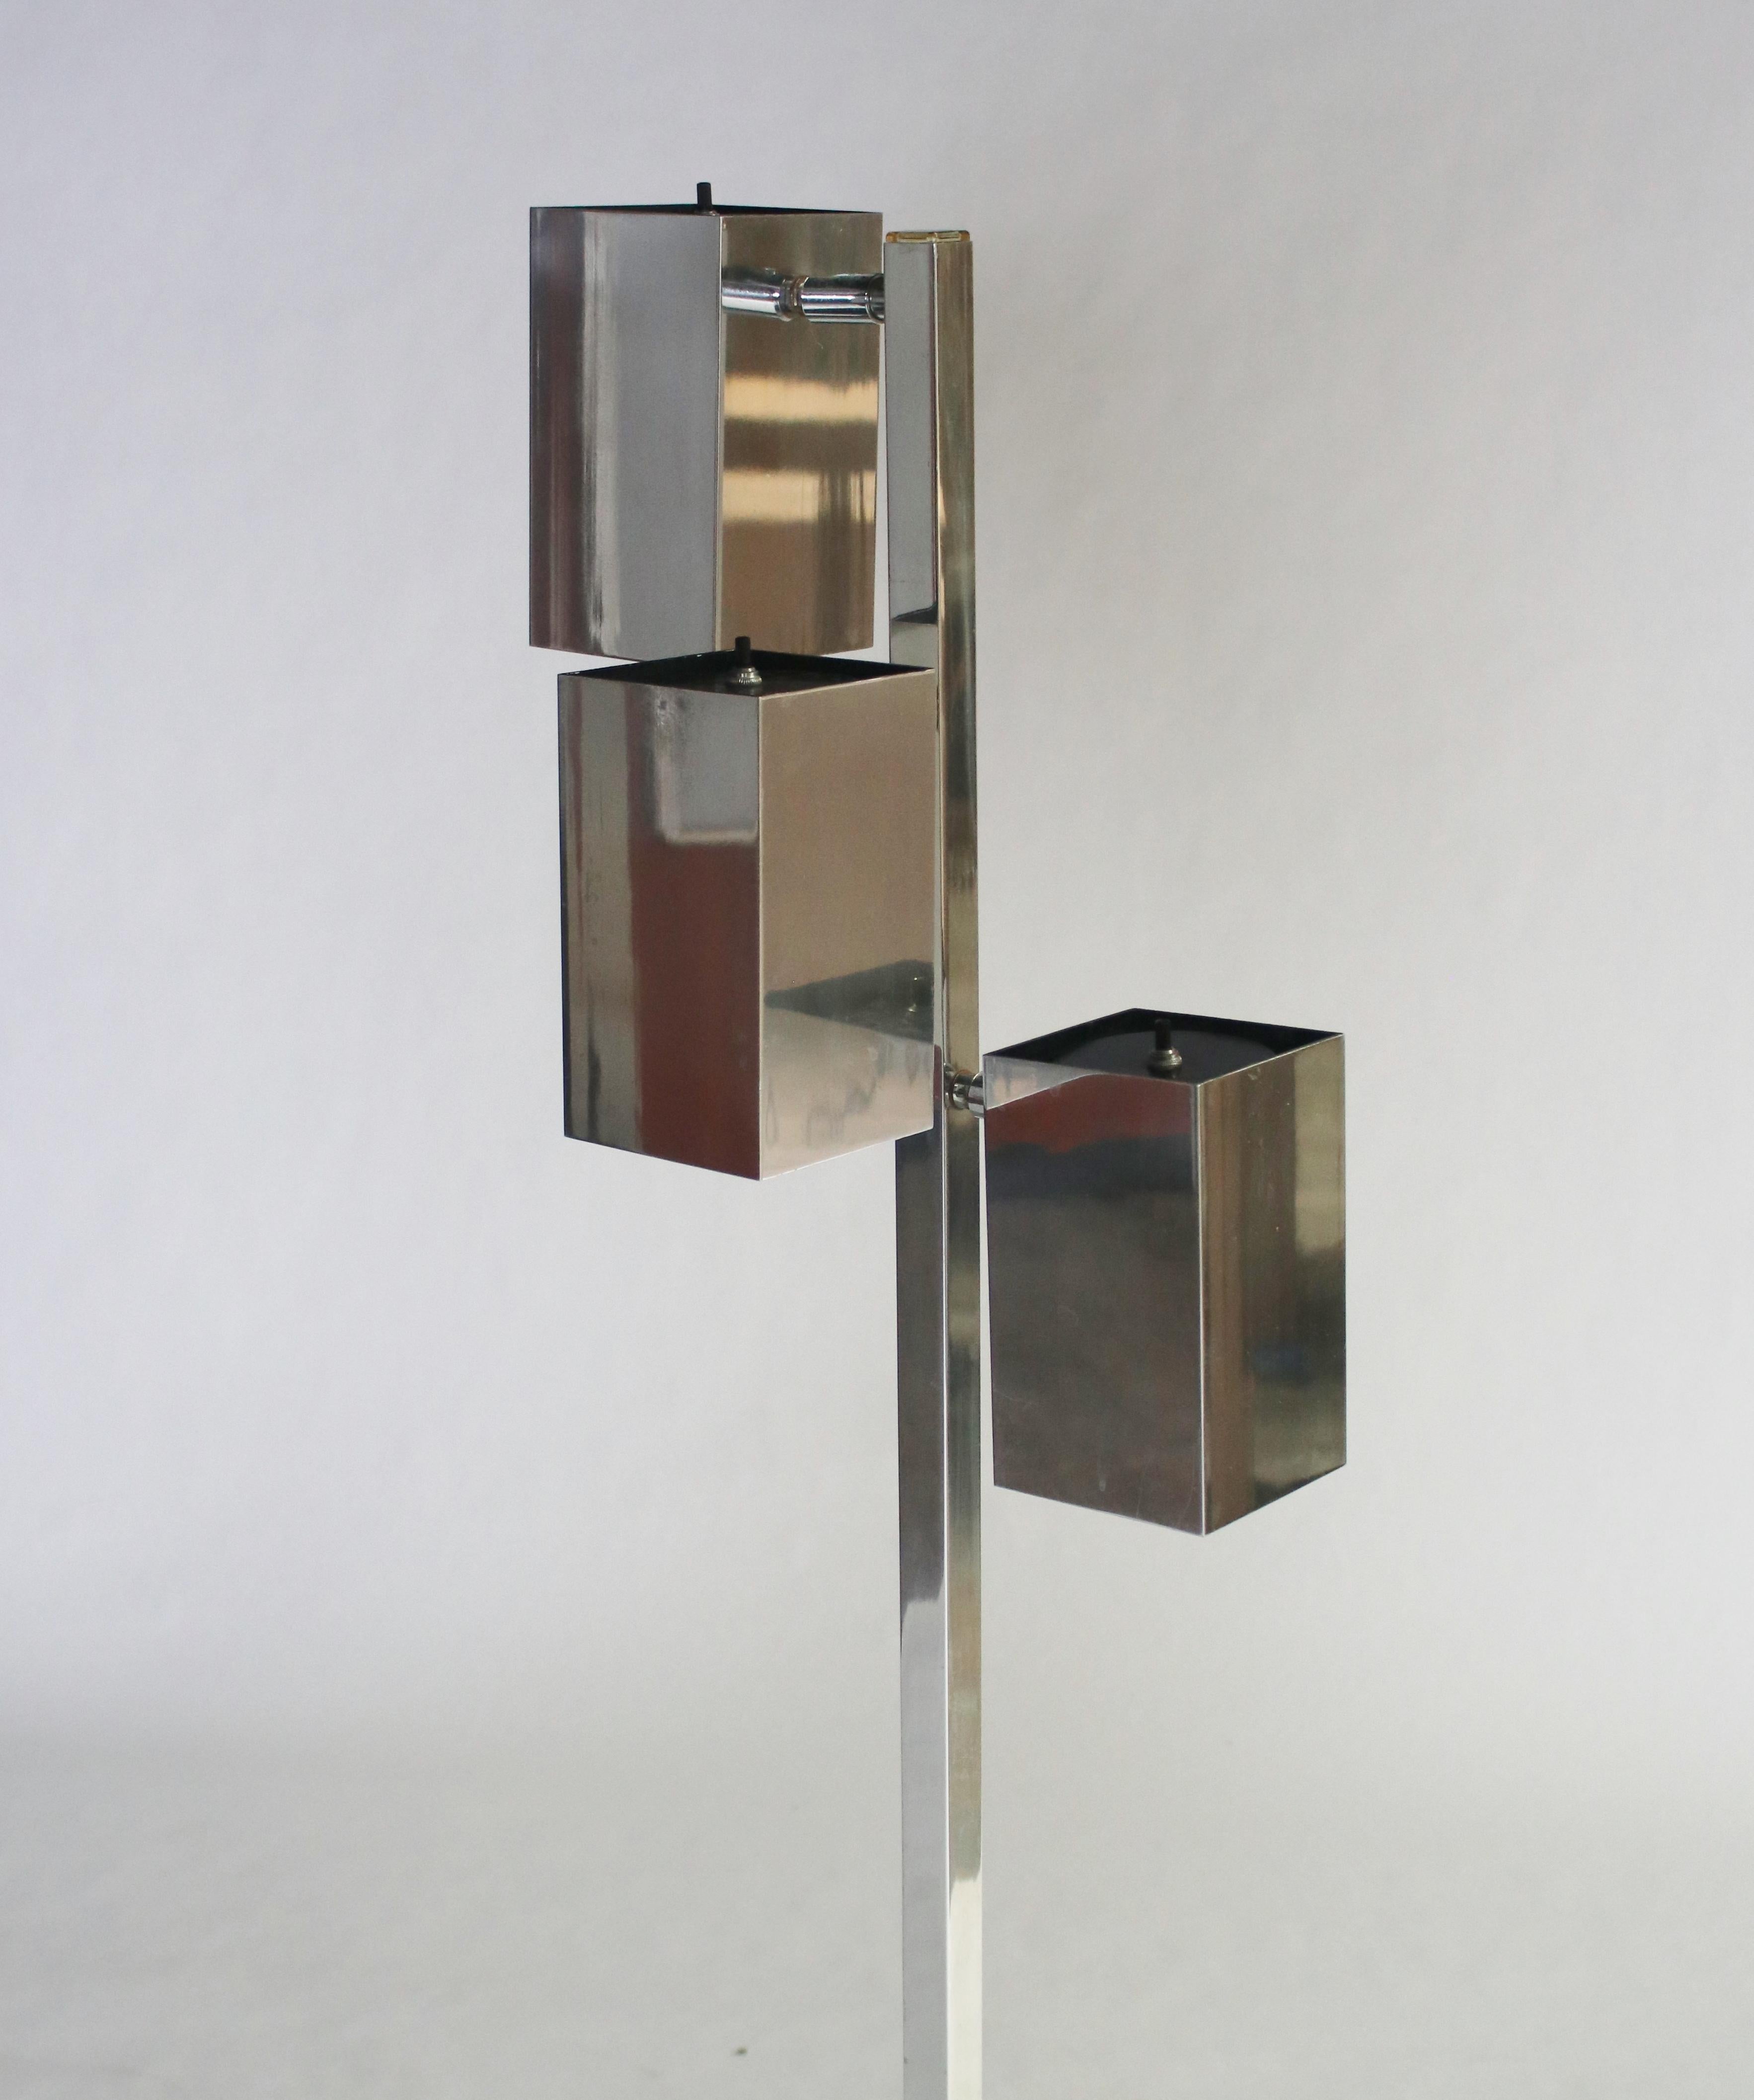 Mid-century modern 3-can chrome floor lamp by Koch and Lowy. Each cubist atriculated light can be adjusted into various positions. Wired and working.